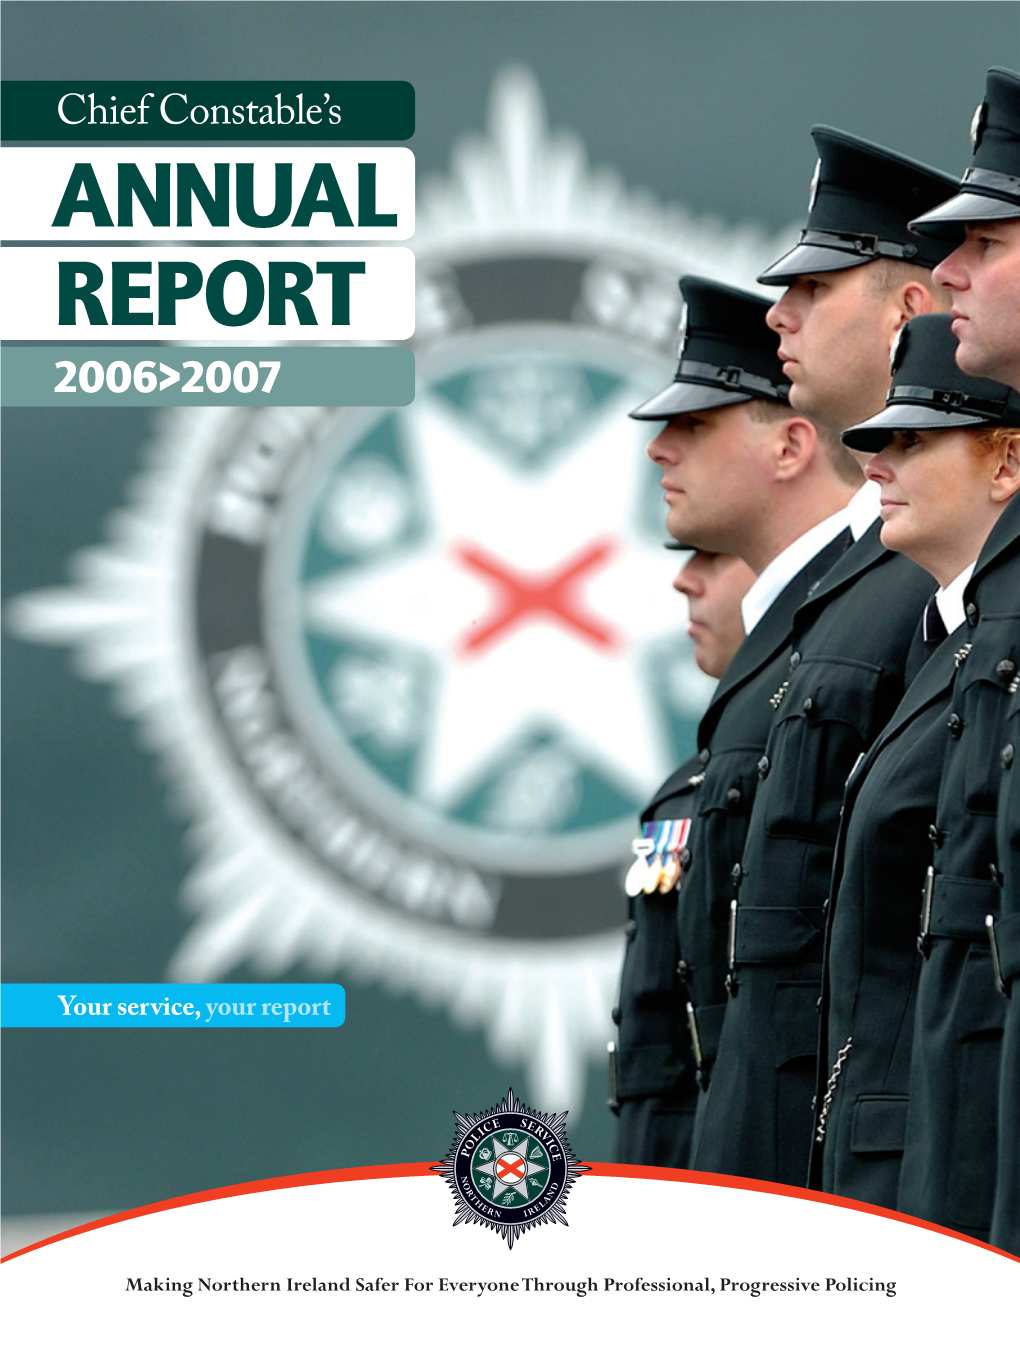 Chief Constable's Annual Report 2006-07